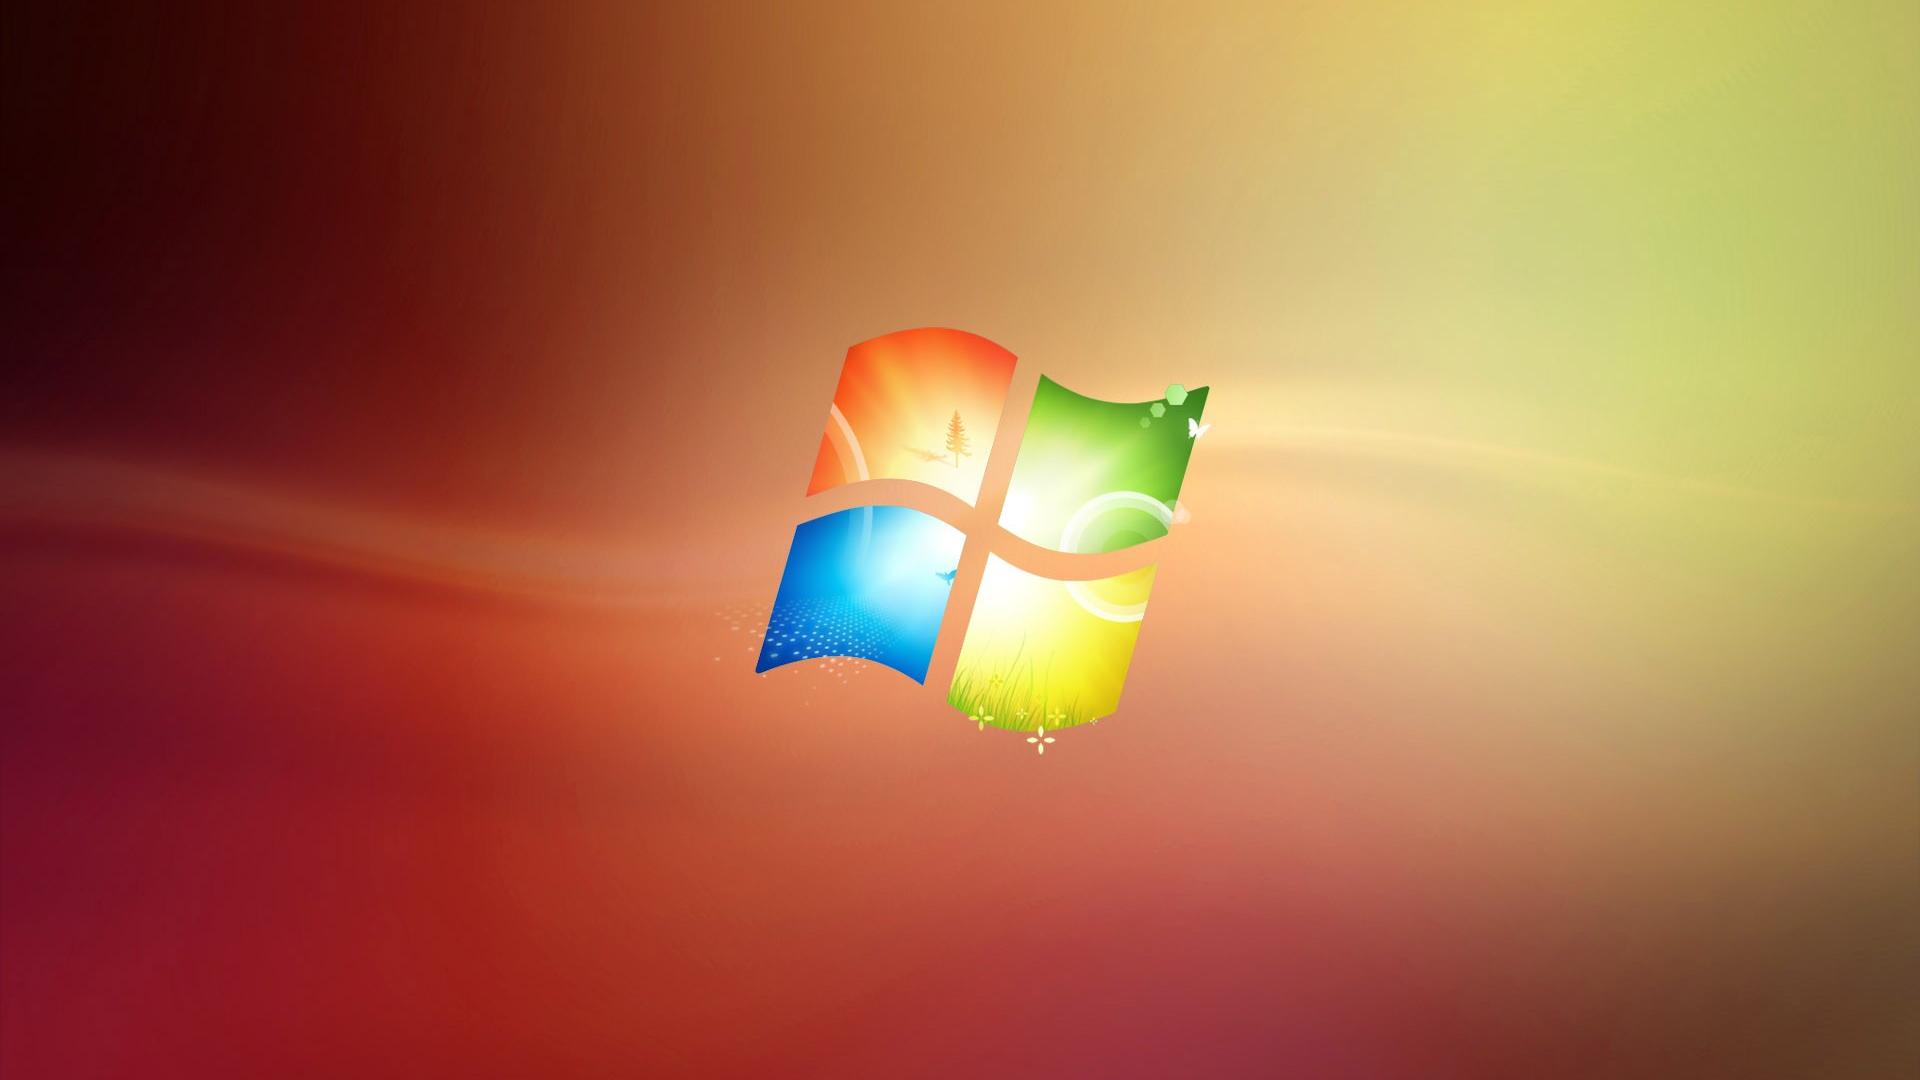 Cool Windows 7 System Colorful Backgrounds Widescreen and 1920x1080